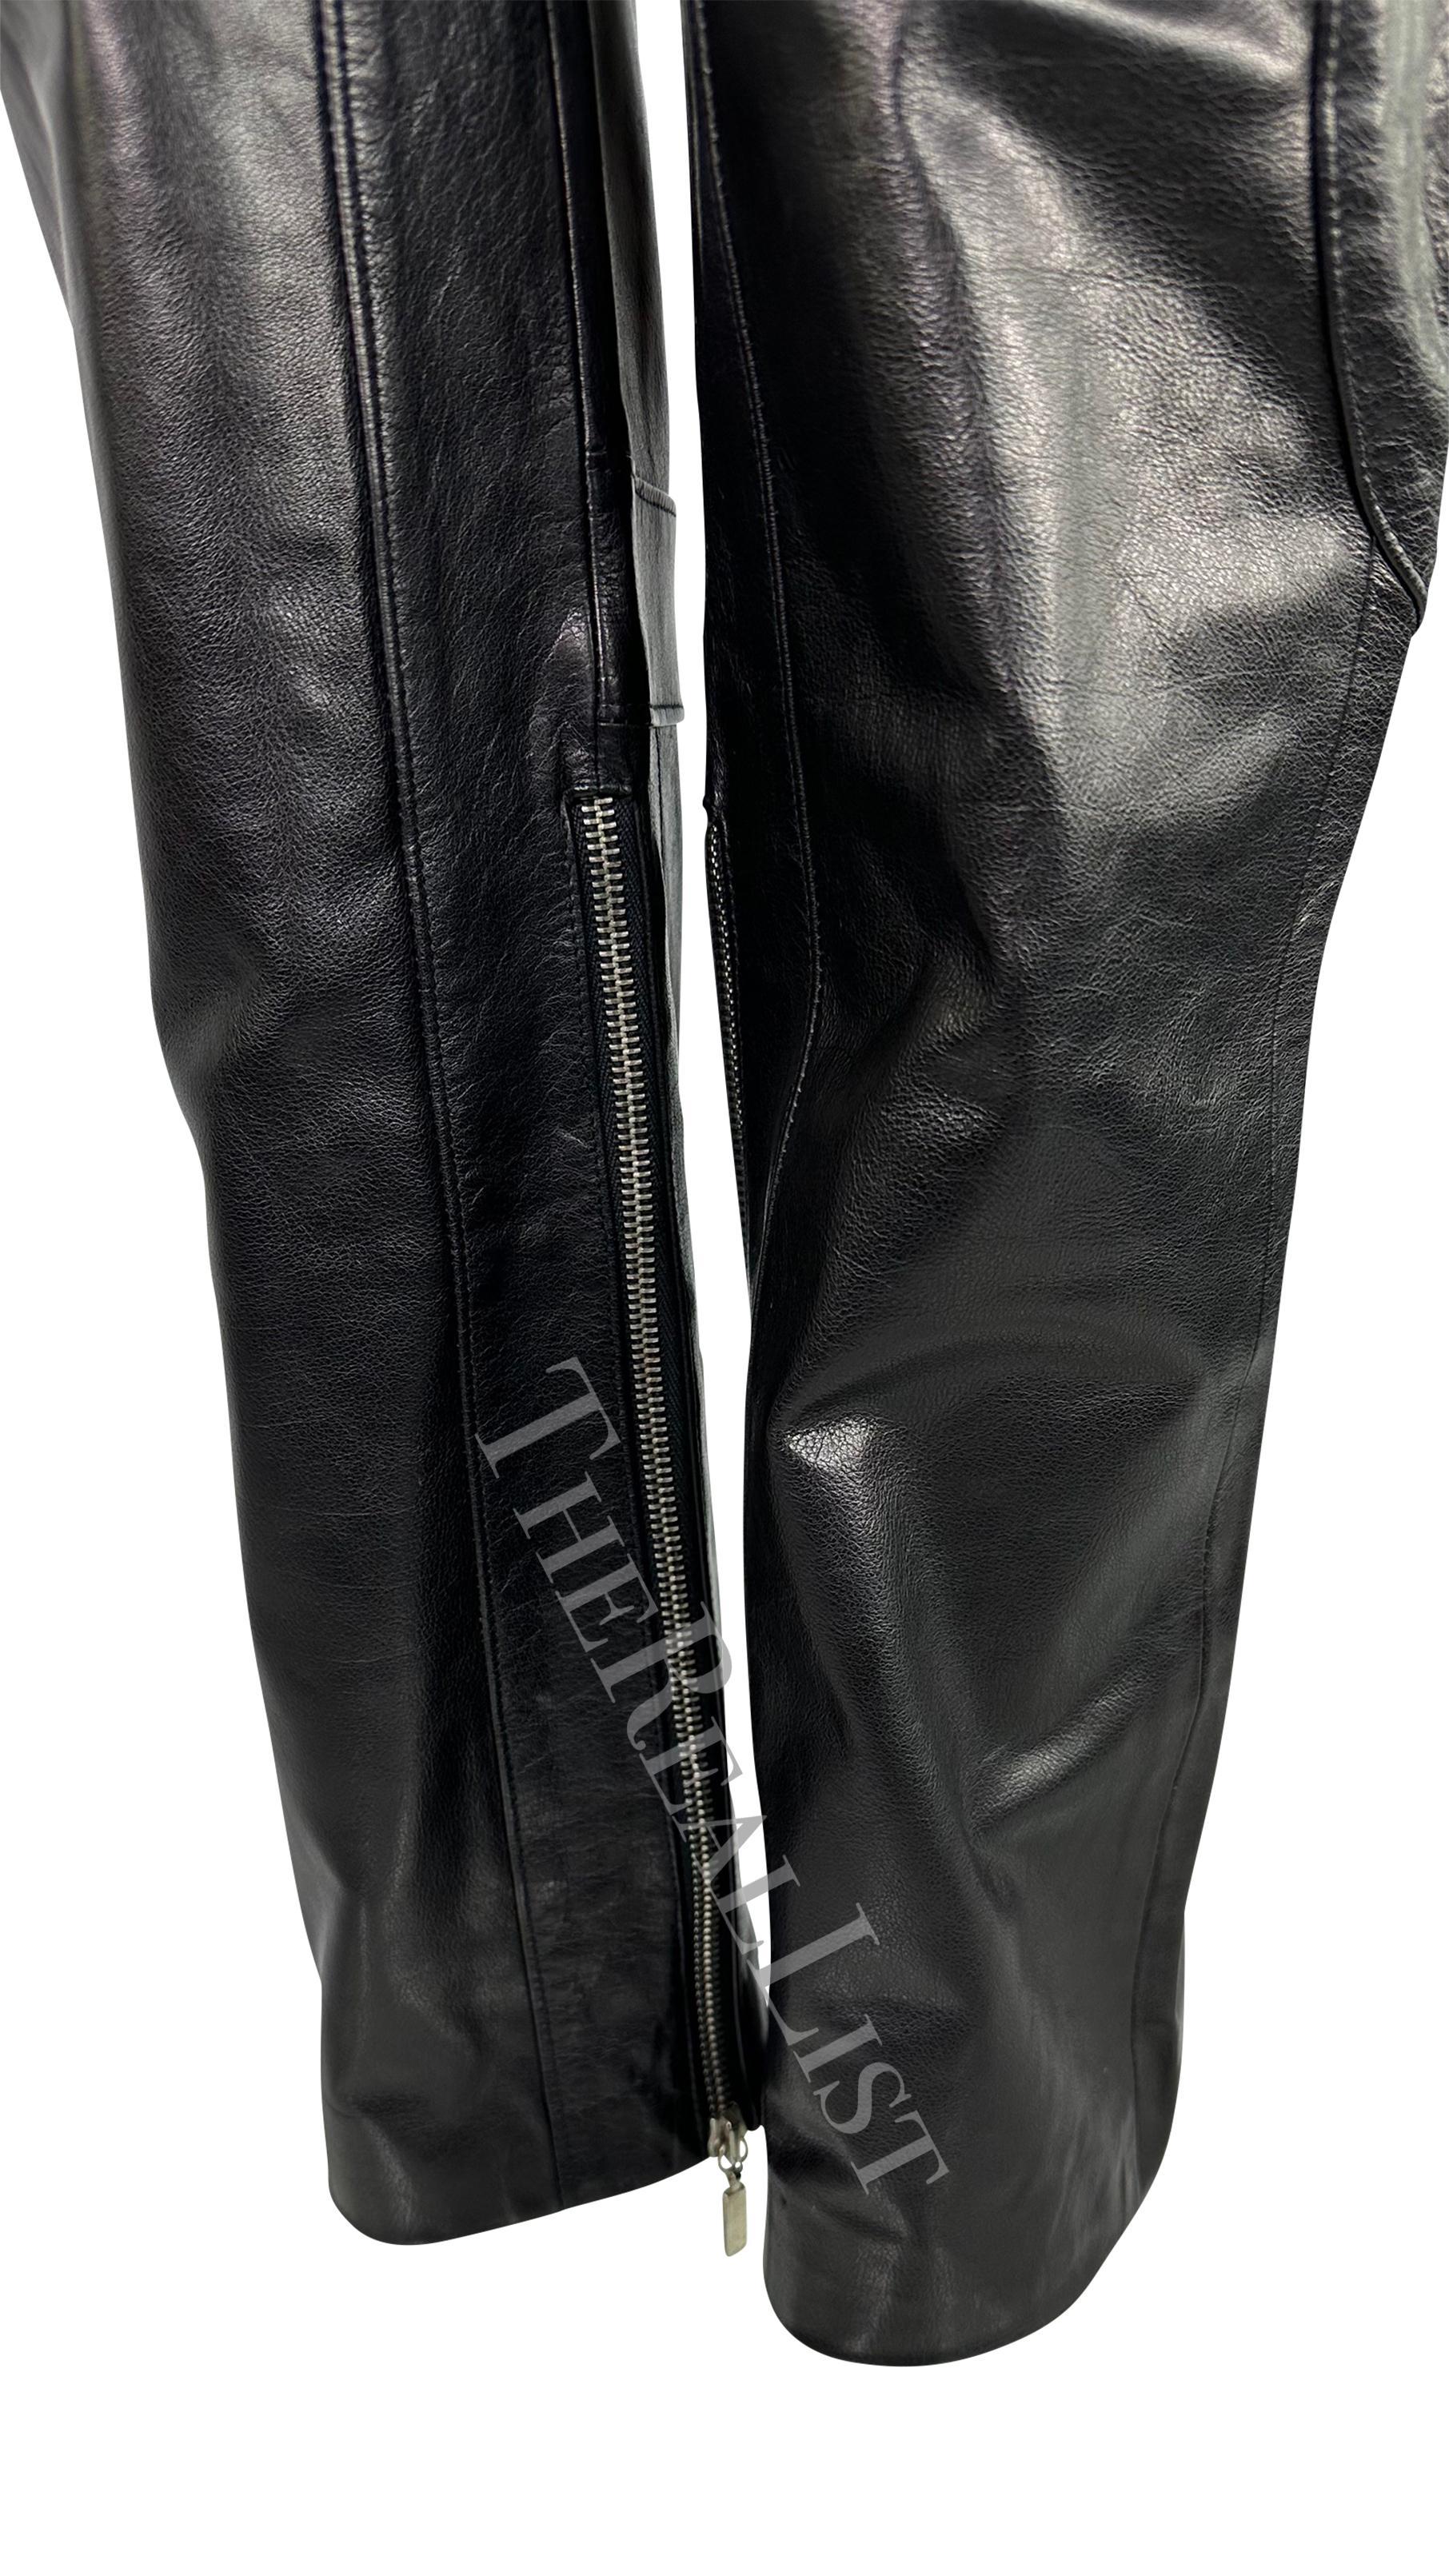 S/S 2002 Gianni Versace by Donatella Black Leather Moto Style Zip Pants For Sale 2